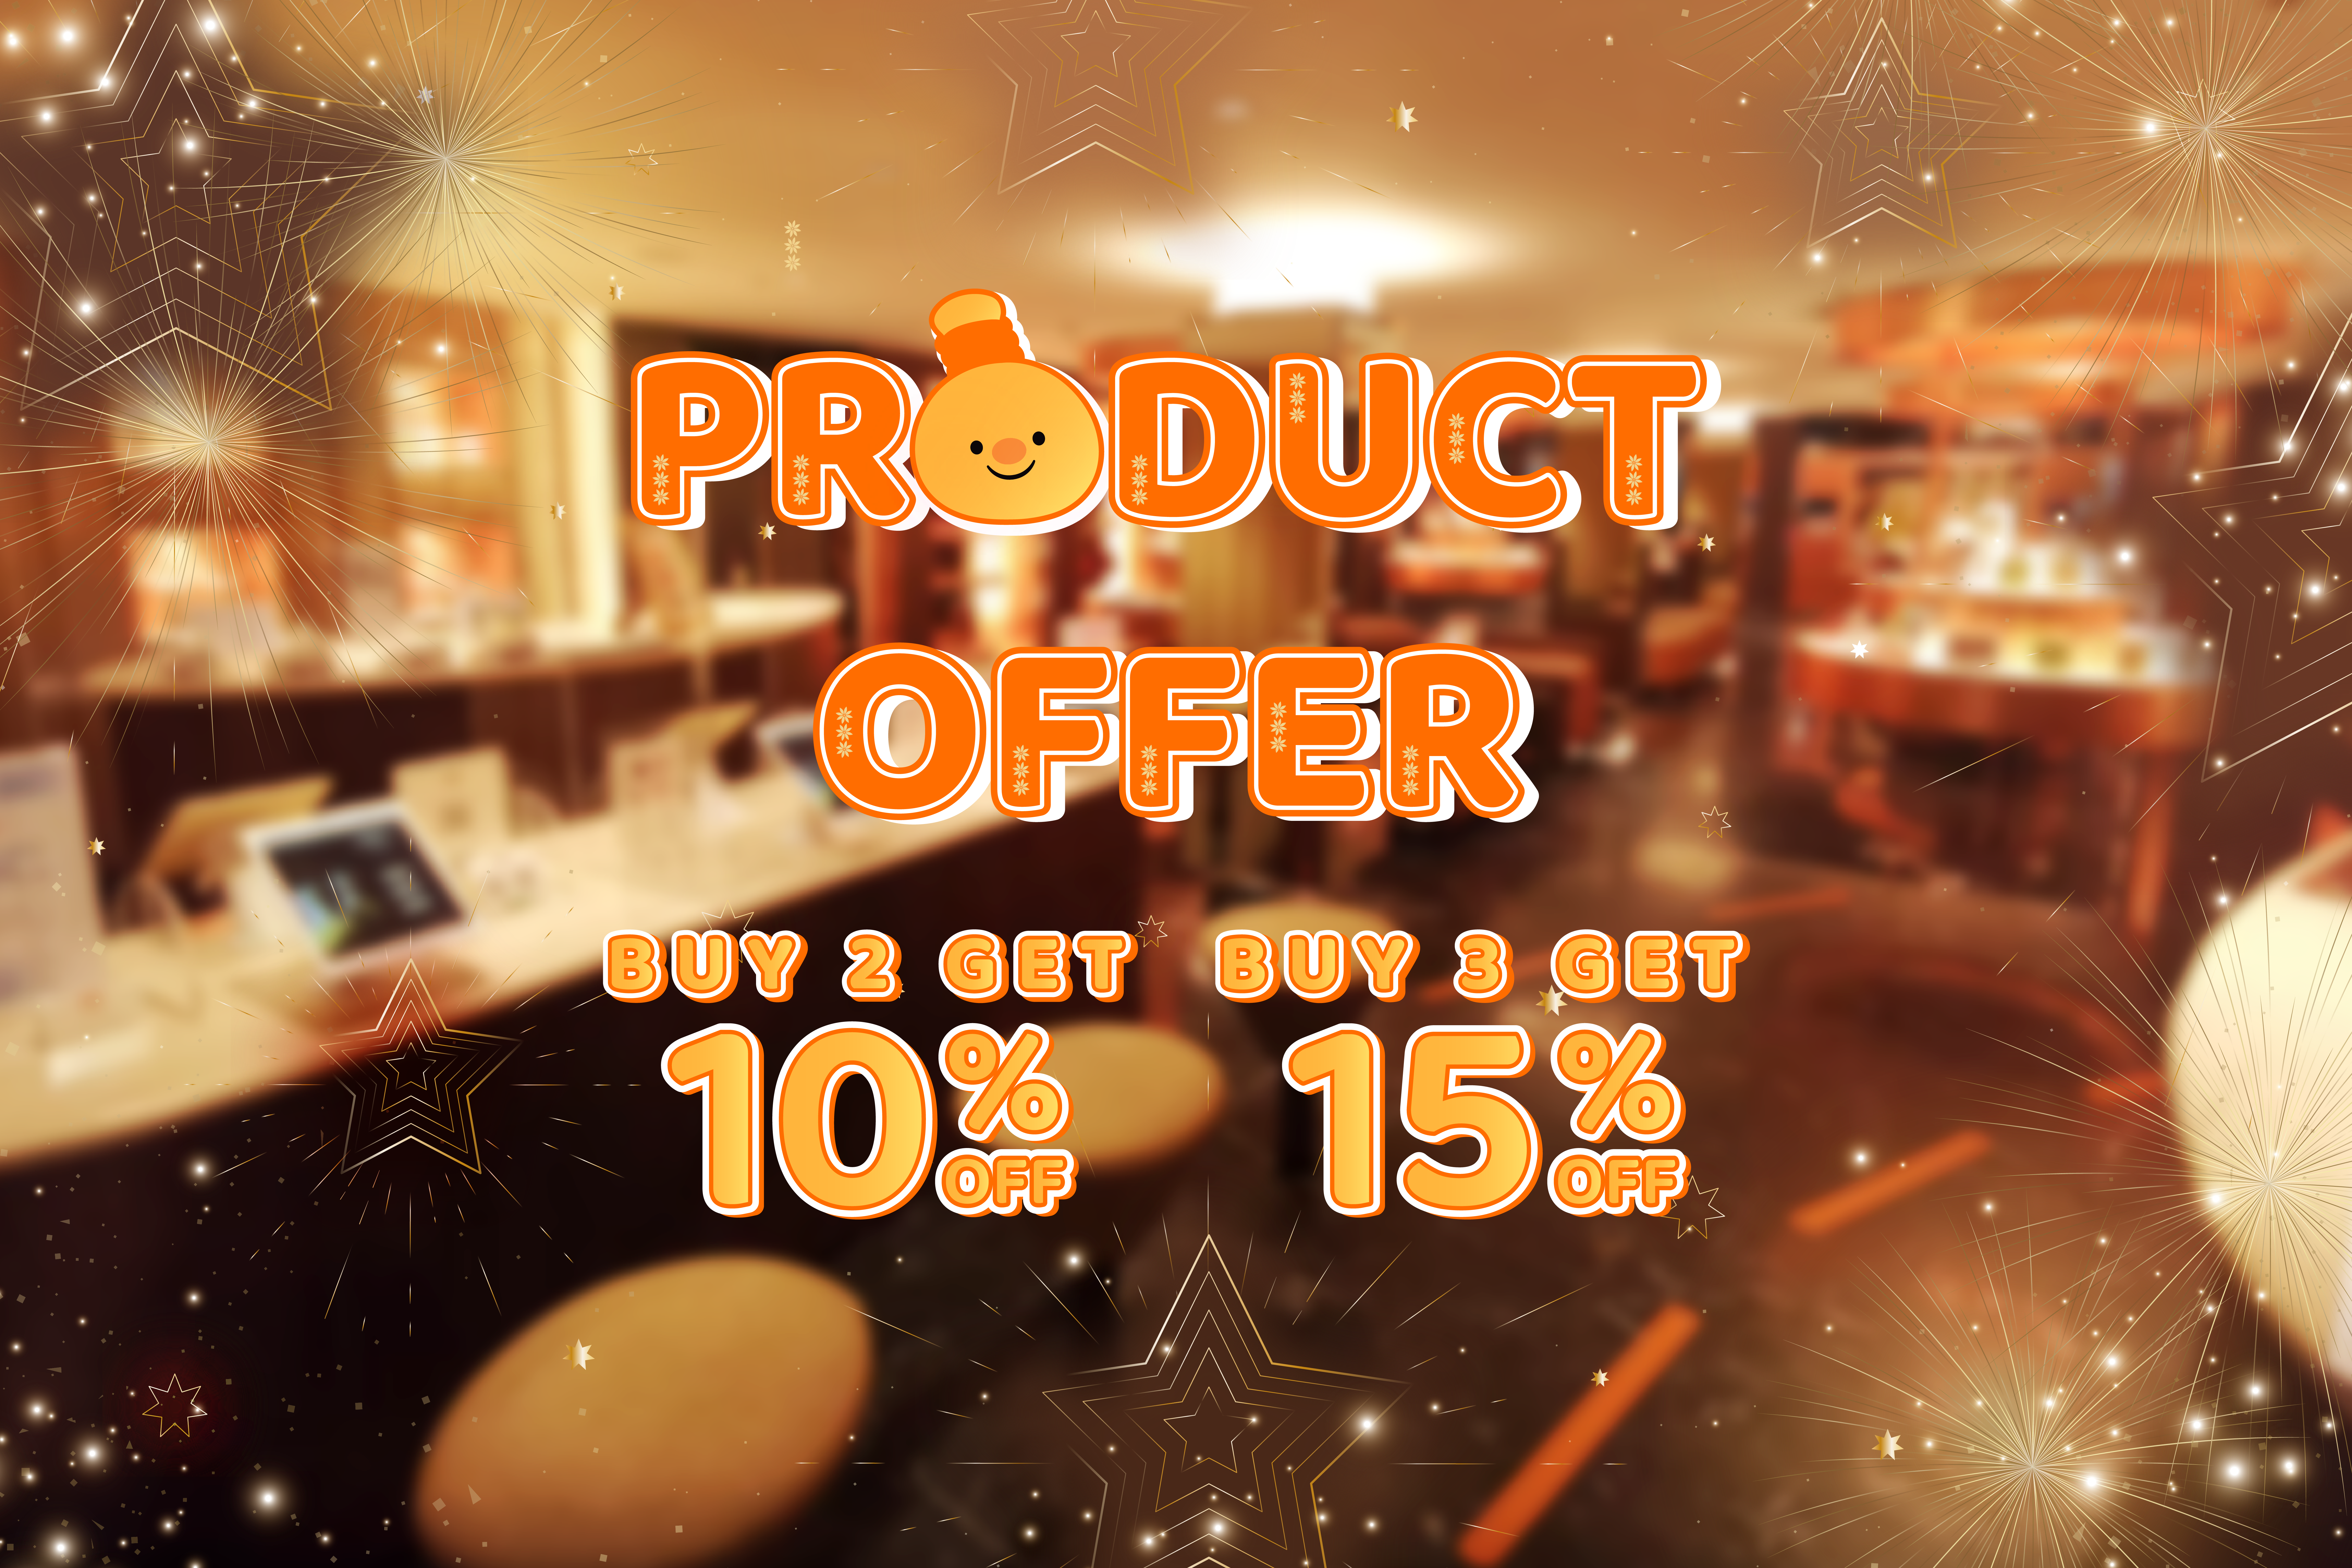 PRODUCT Max 15% Discount